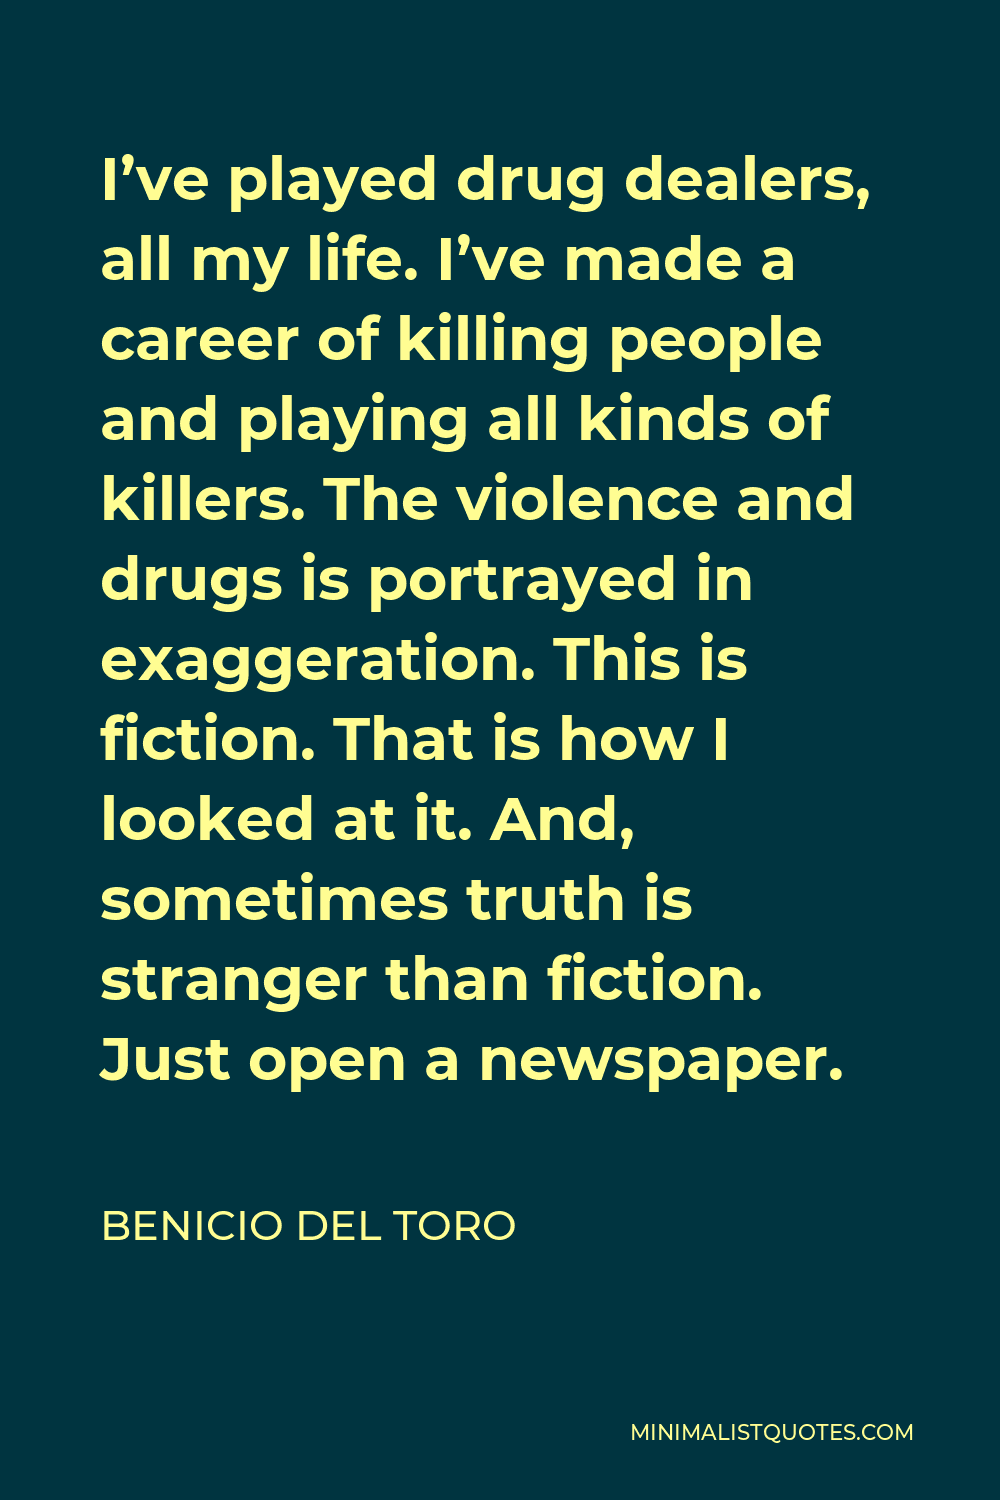 Benicio Del Toro Quote - I’ve played drug dealers, all my life. I’ve made a career of killing people and playing all kinds of killers. The violence and drugs is portrayed in exaggeration. This is fiction. That is how I looked at it. And, sometimes truth is stranger than fiction. Just open a newspaper.